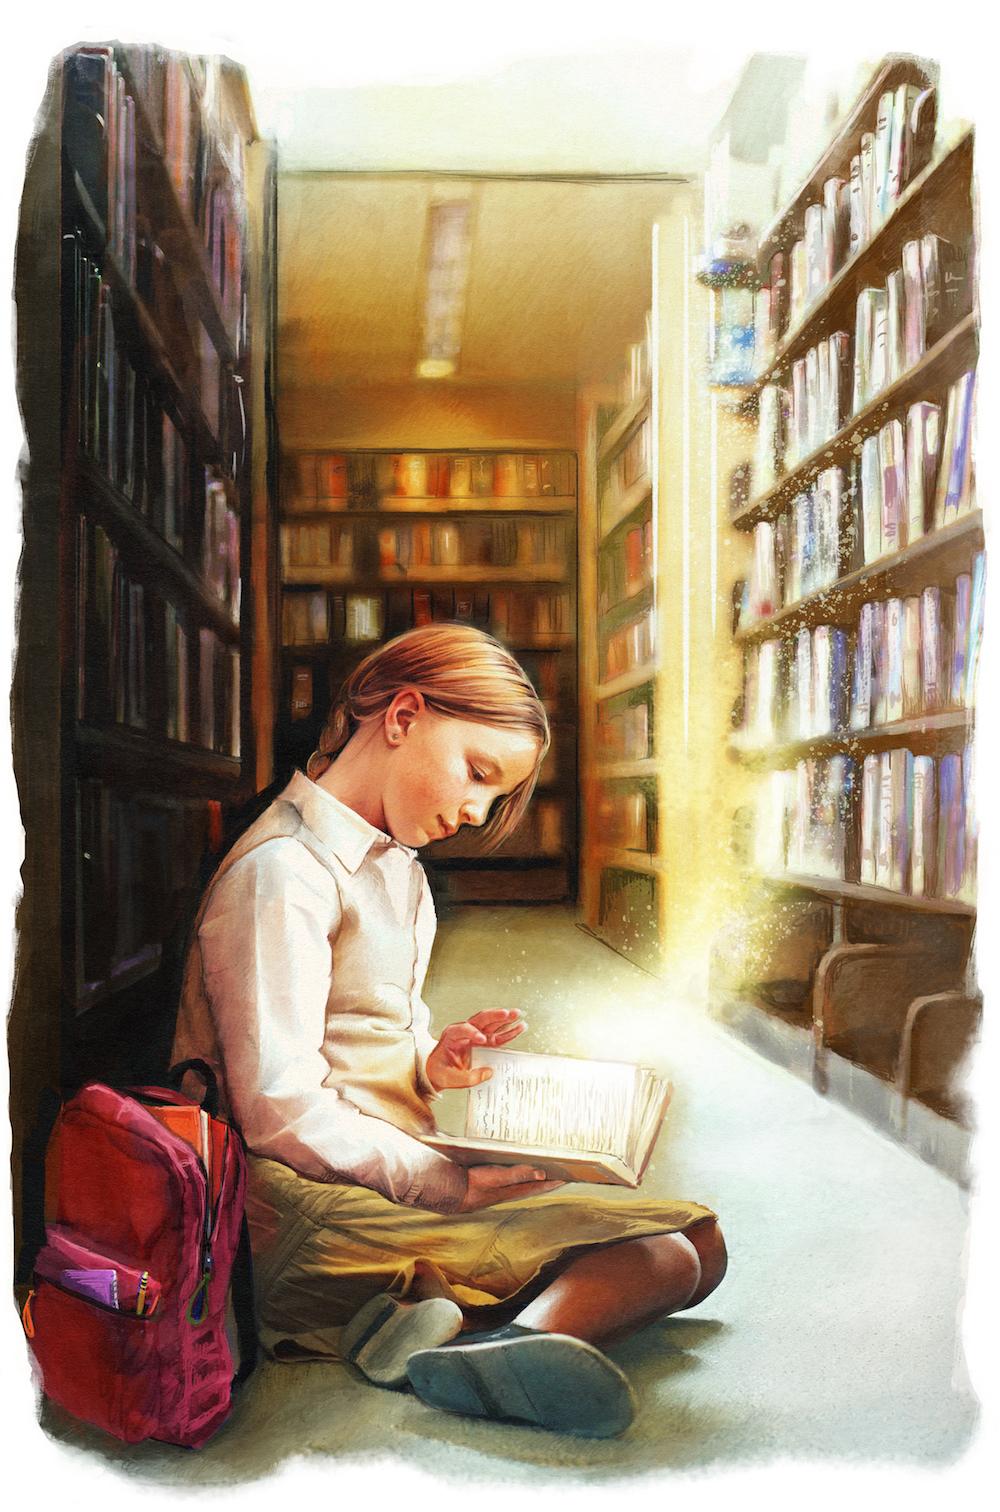 There are still plenty of wholesome books at the library if you just know where to look. (Biba Kayewich)